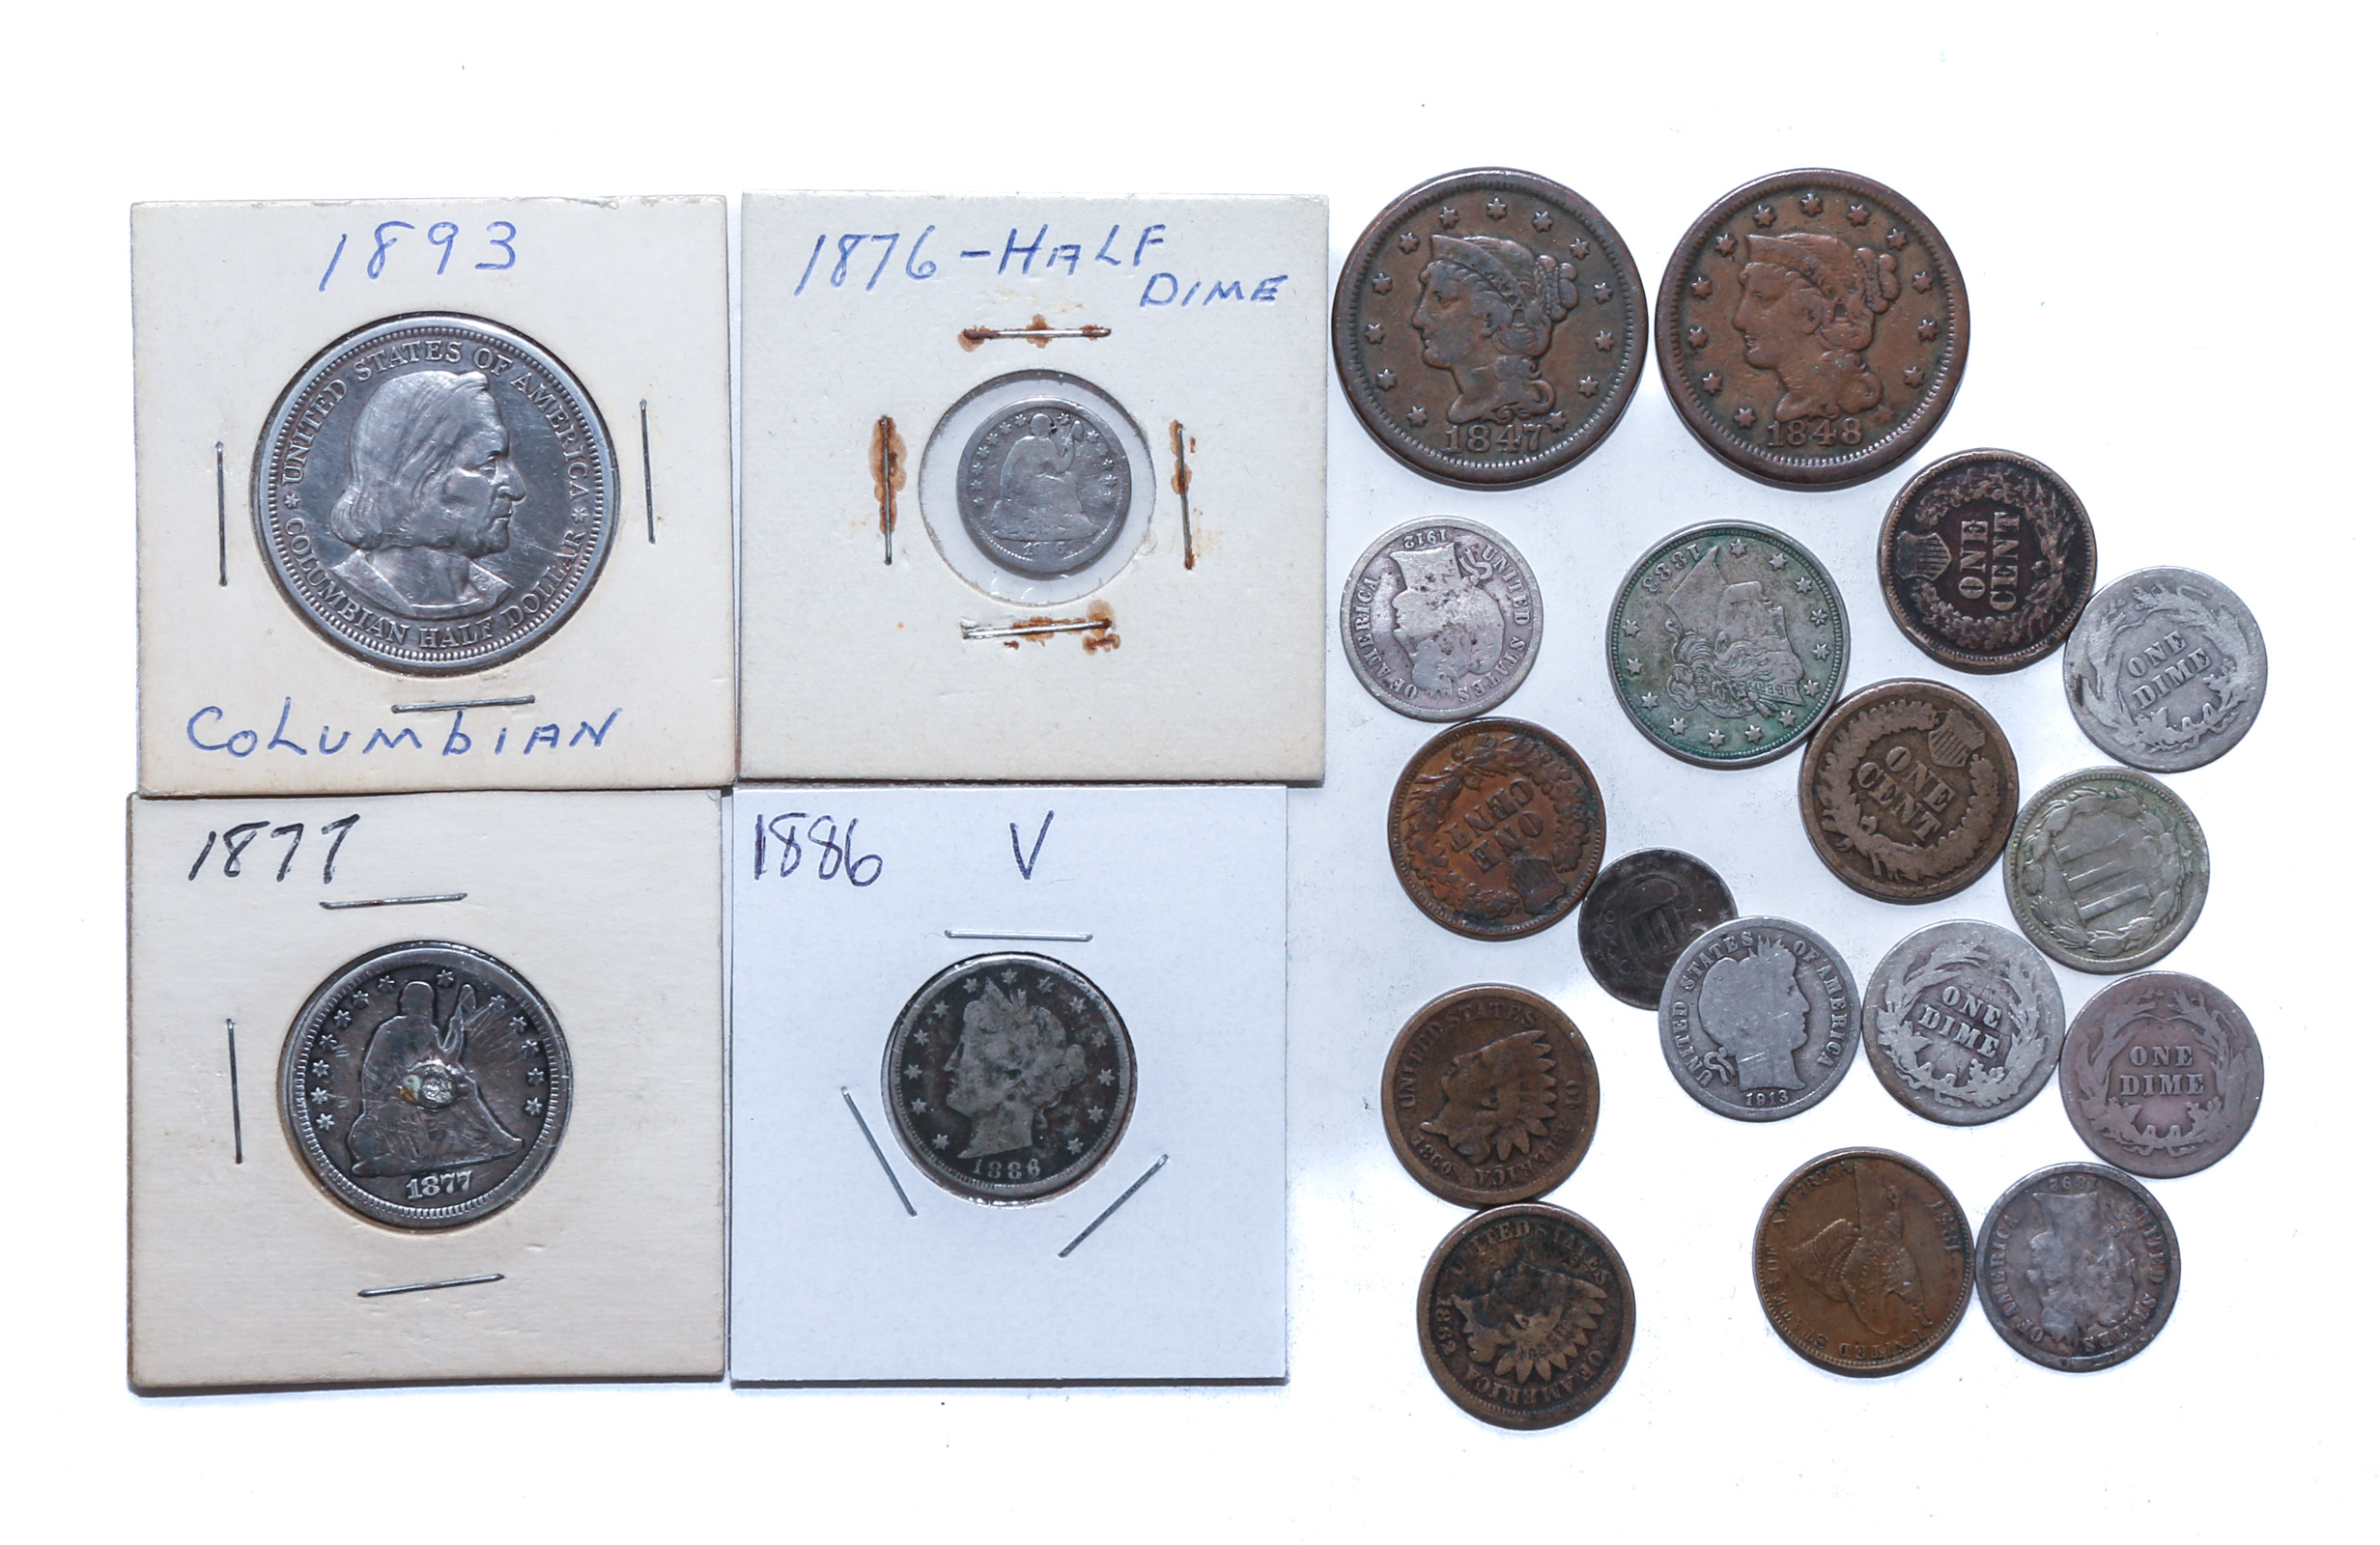 21 US TYPE COINS WITH BETTER DATE 308a7f